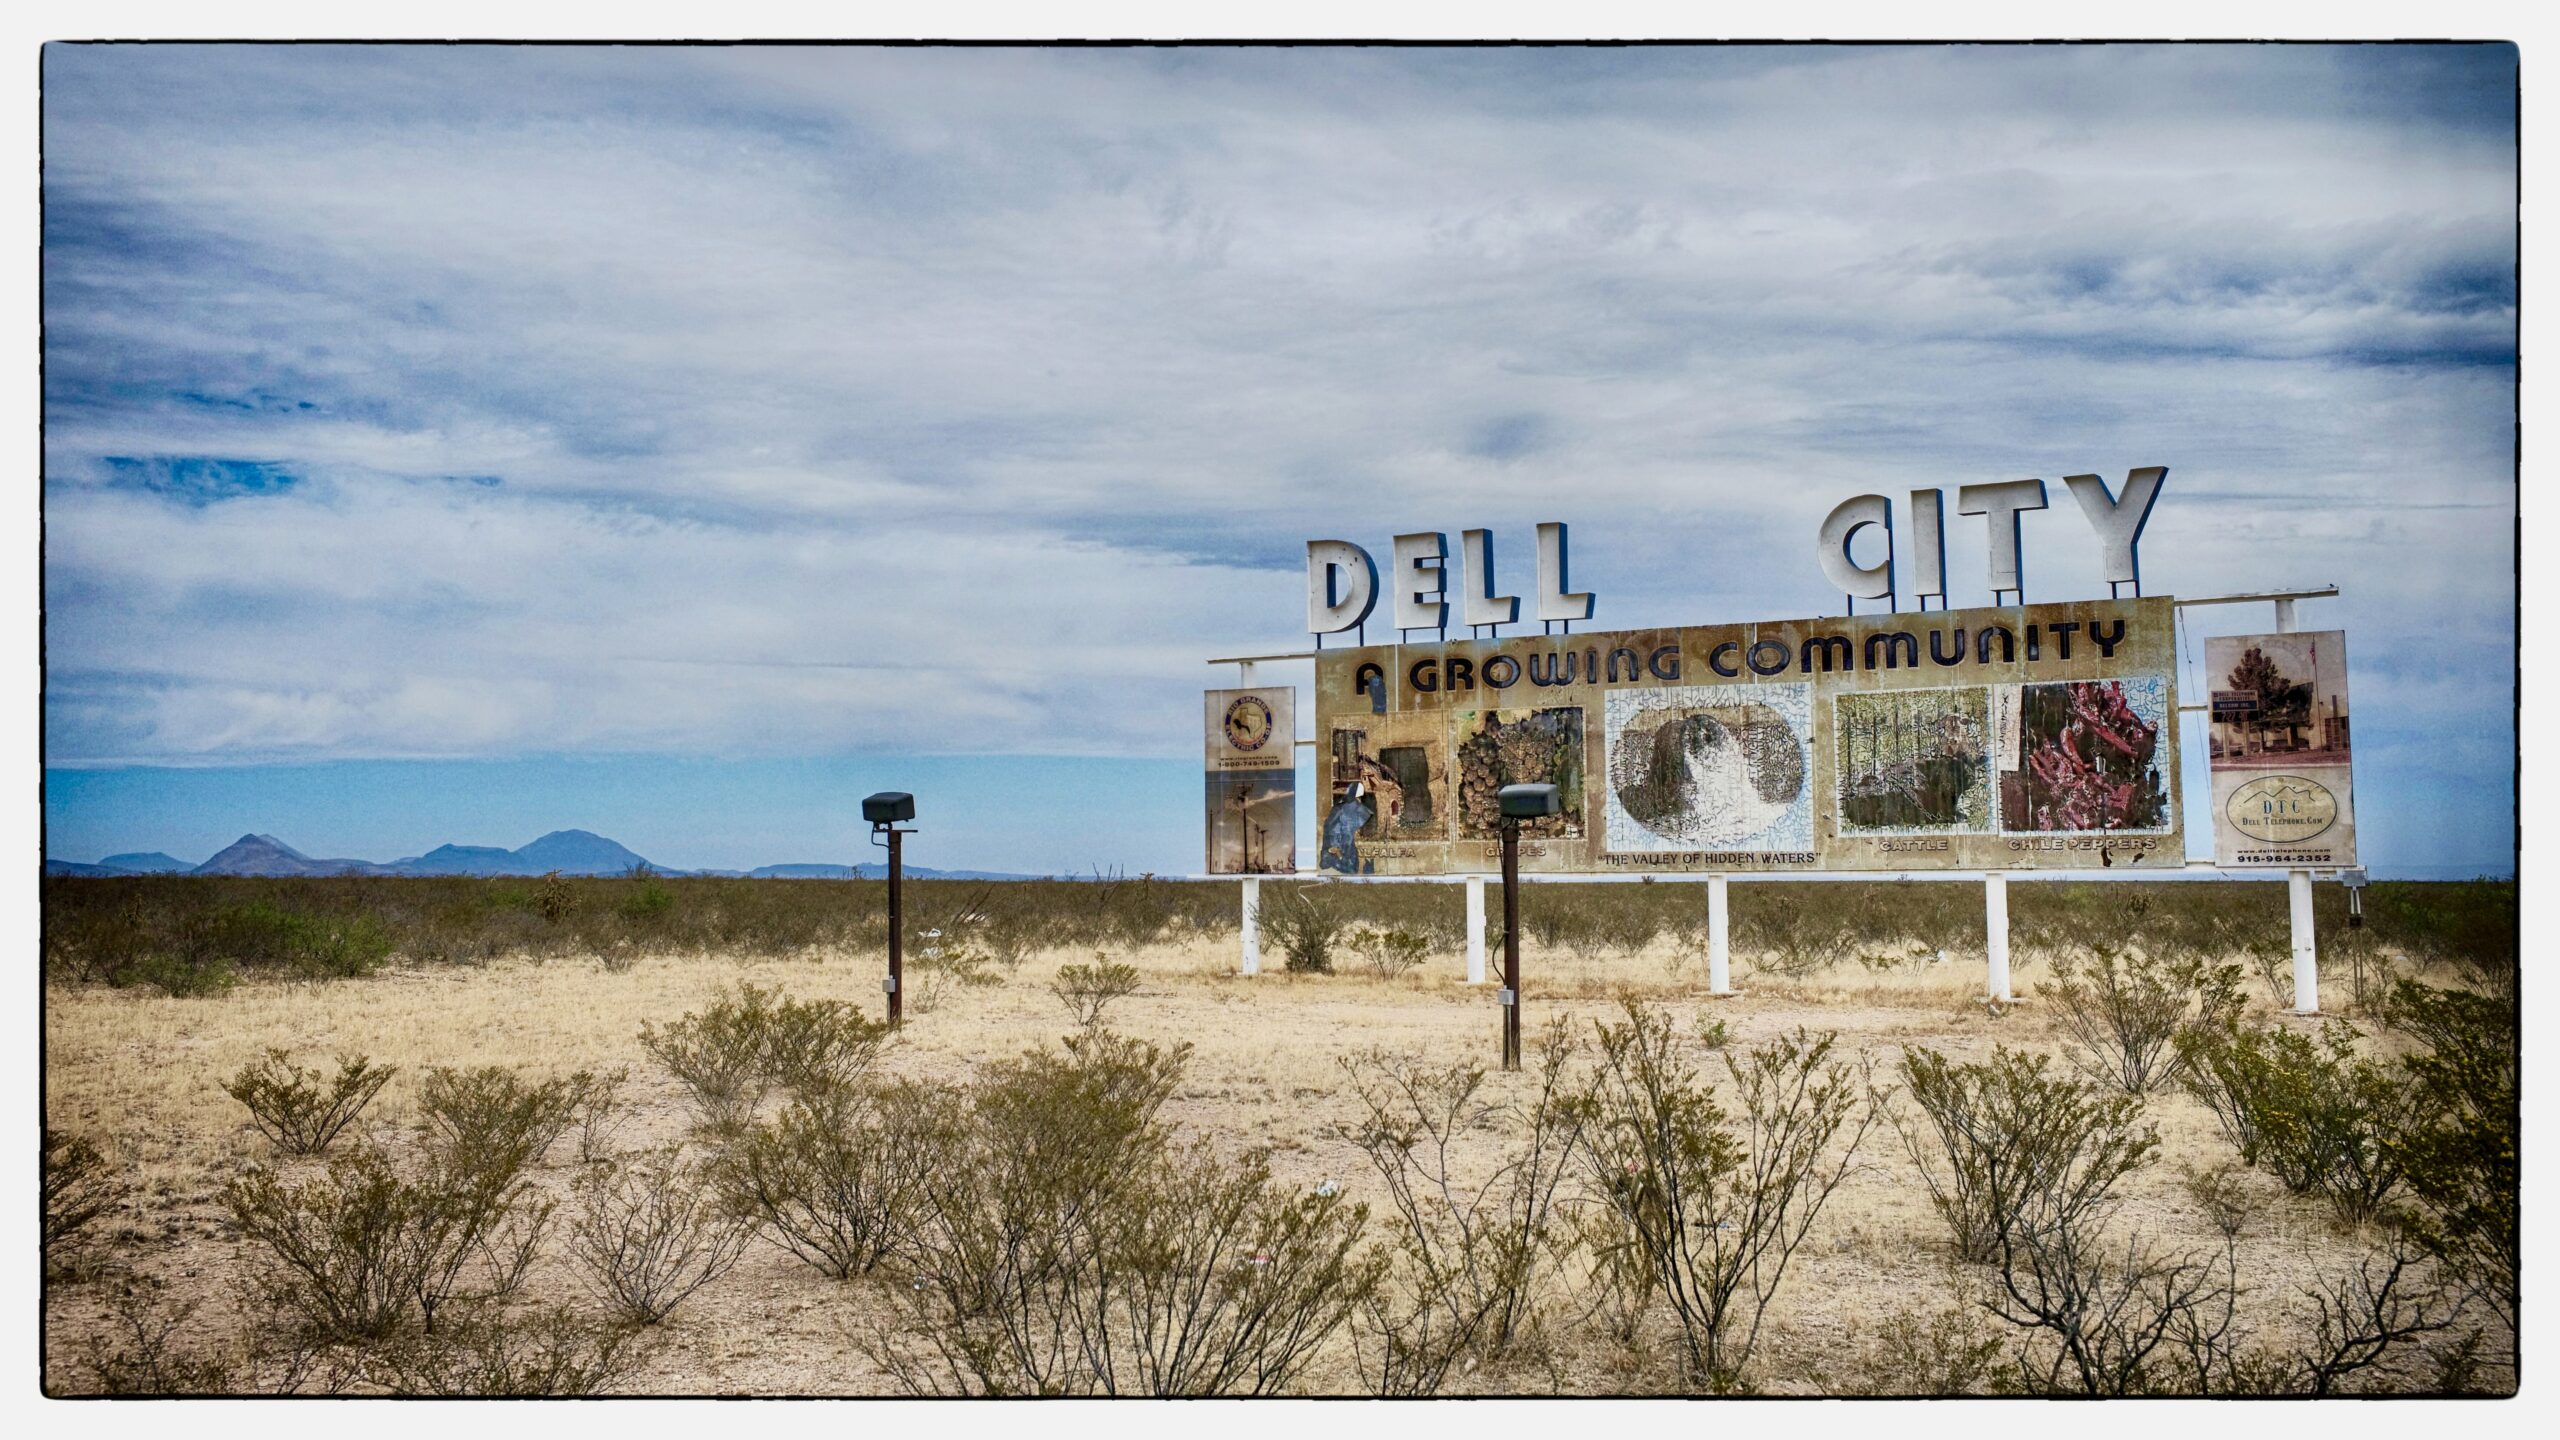 a weathered billboard, topped by the words "Dell City" and displaying faded images of industry and nature, stands in a scrubby desert landscape with mountain peaks and a cloudy blue sky in the background